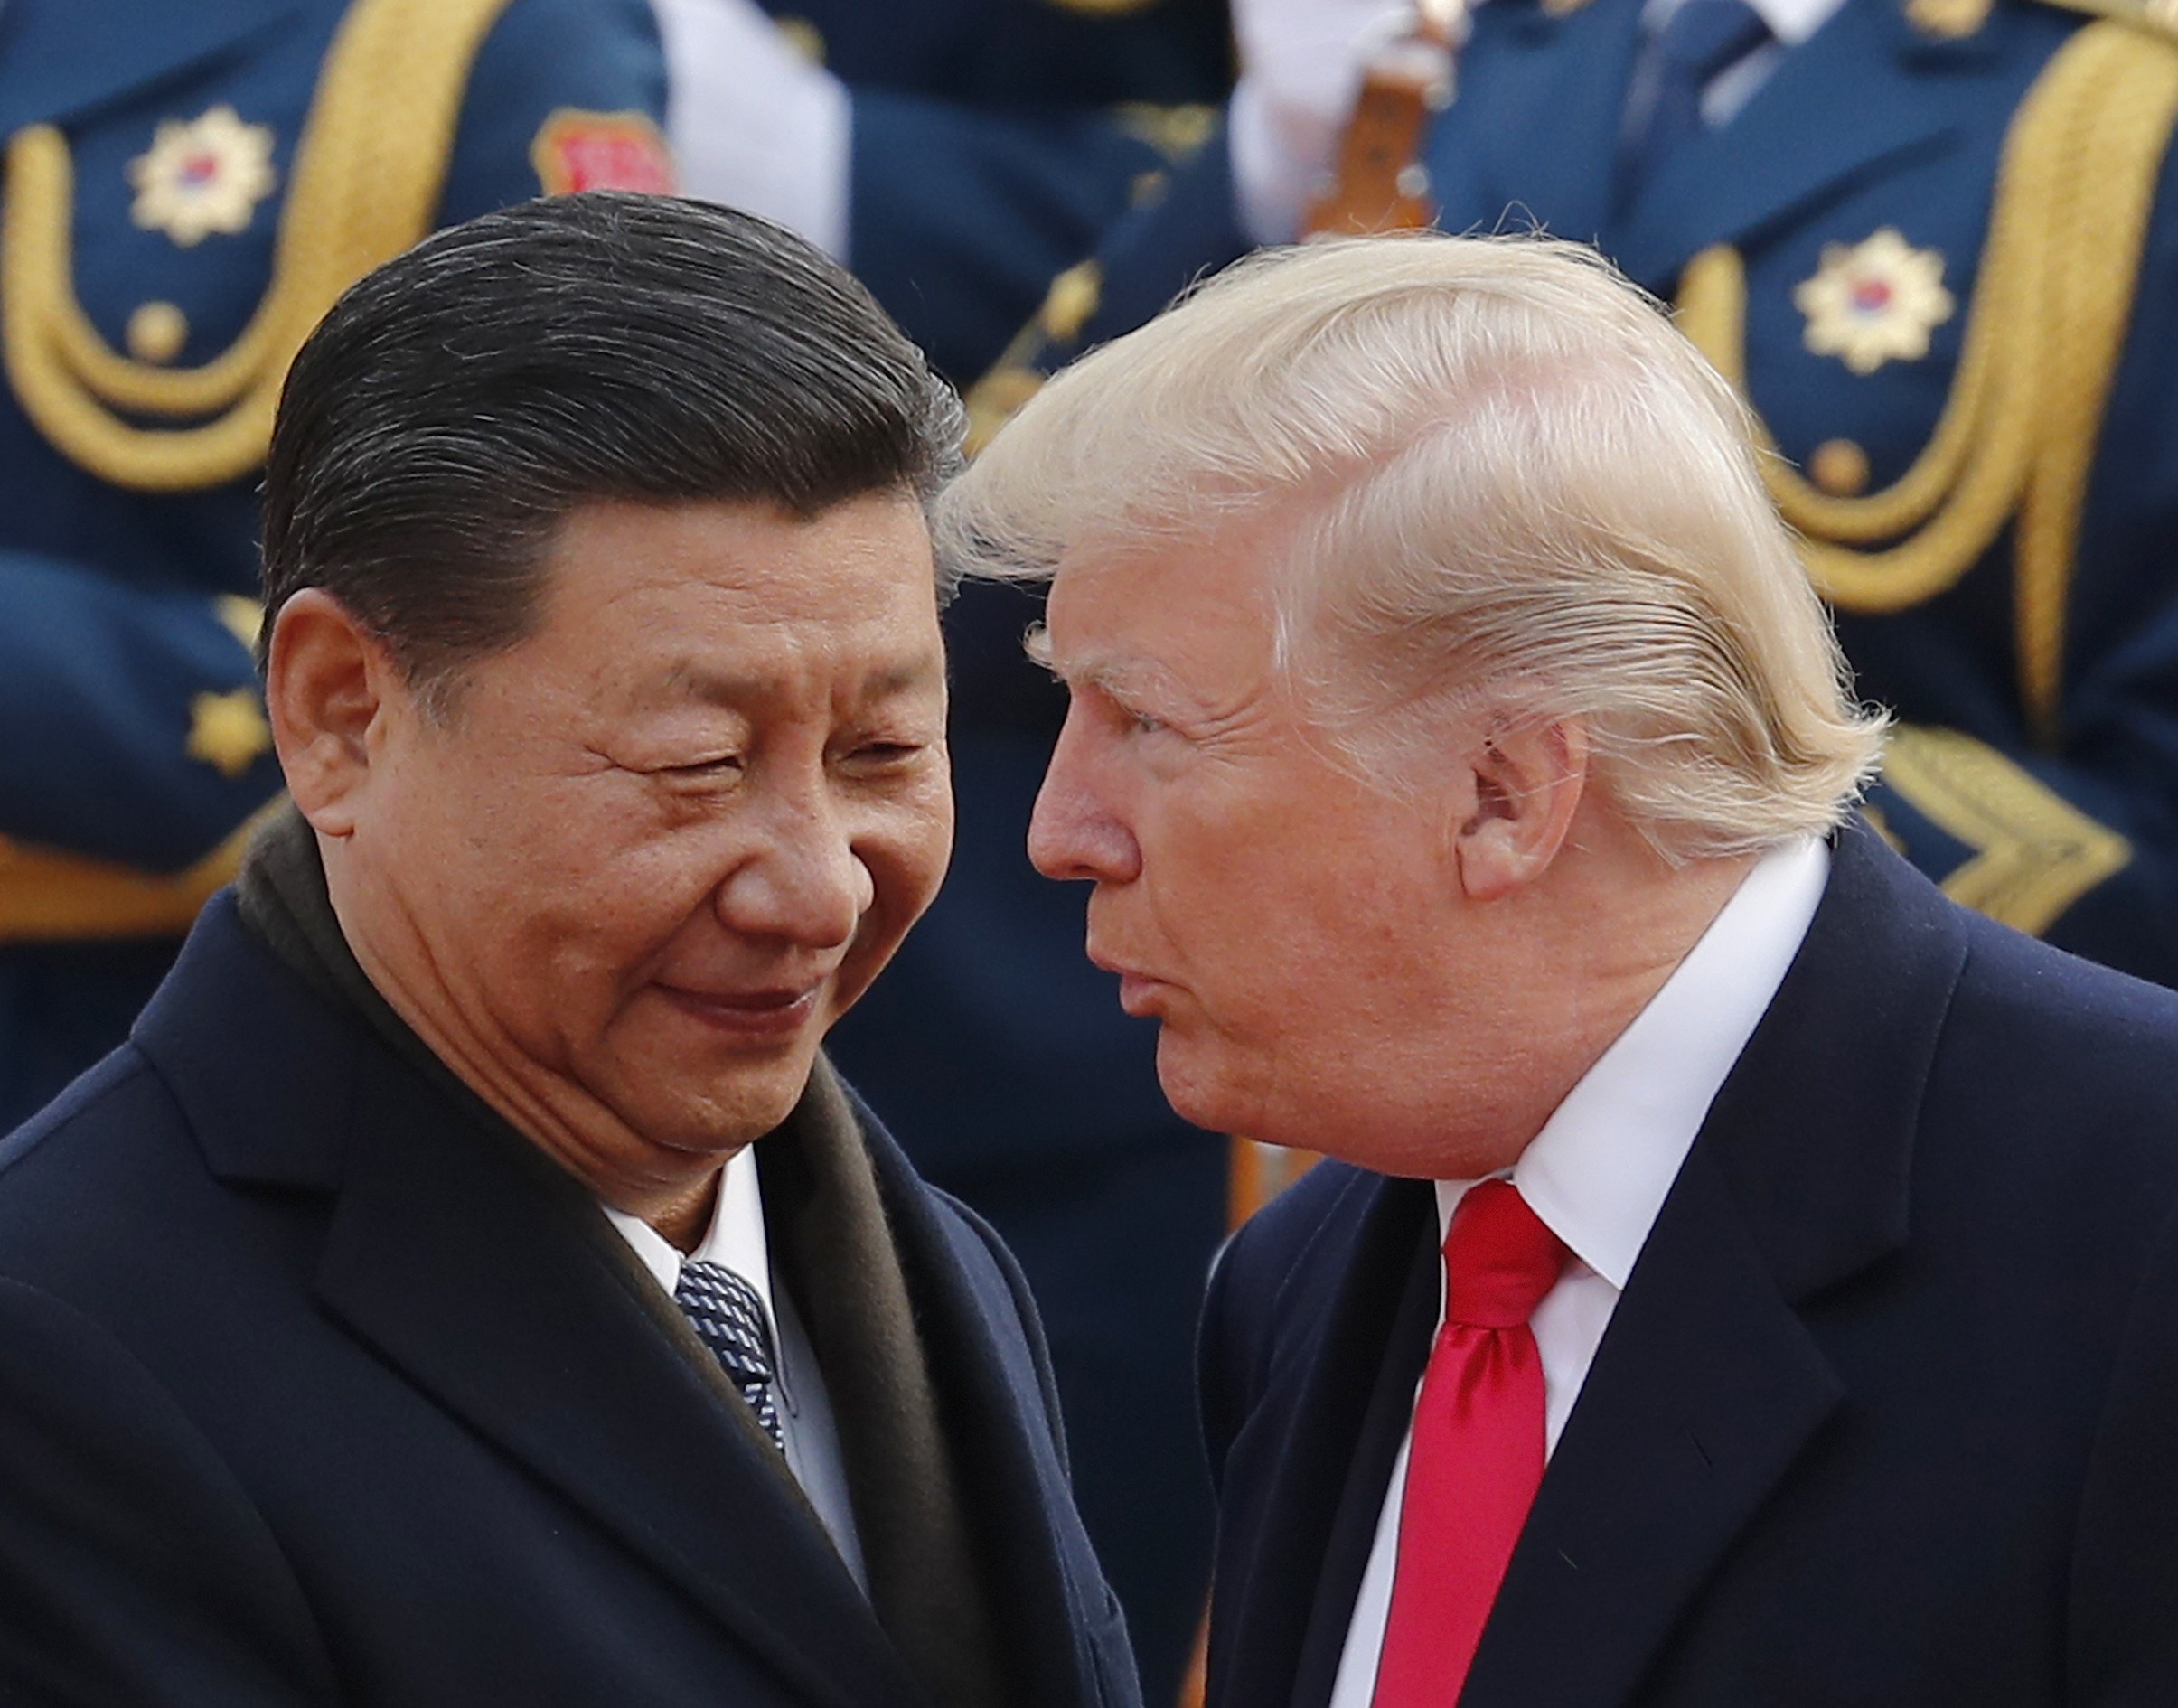 In this November 9, 2017 file photo, US President Donald Trump (right) chats with Chinese President Xi Jinping during a welcome ceremony at the Great Hall of the People in Beijing. Photo: AP